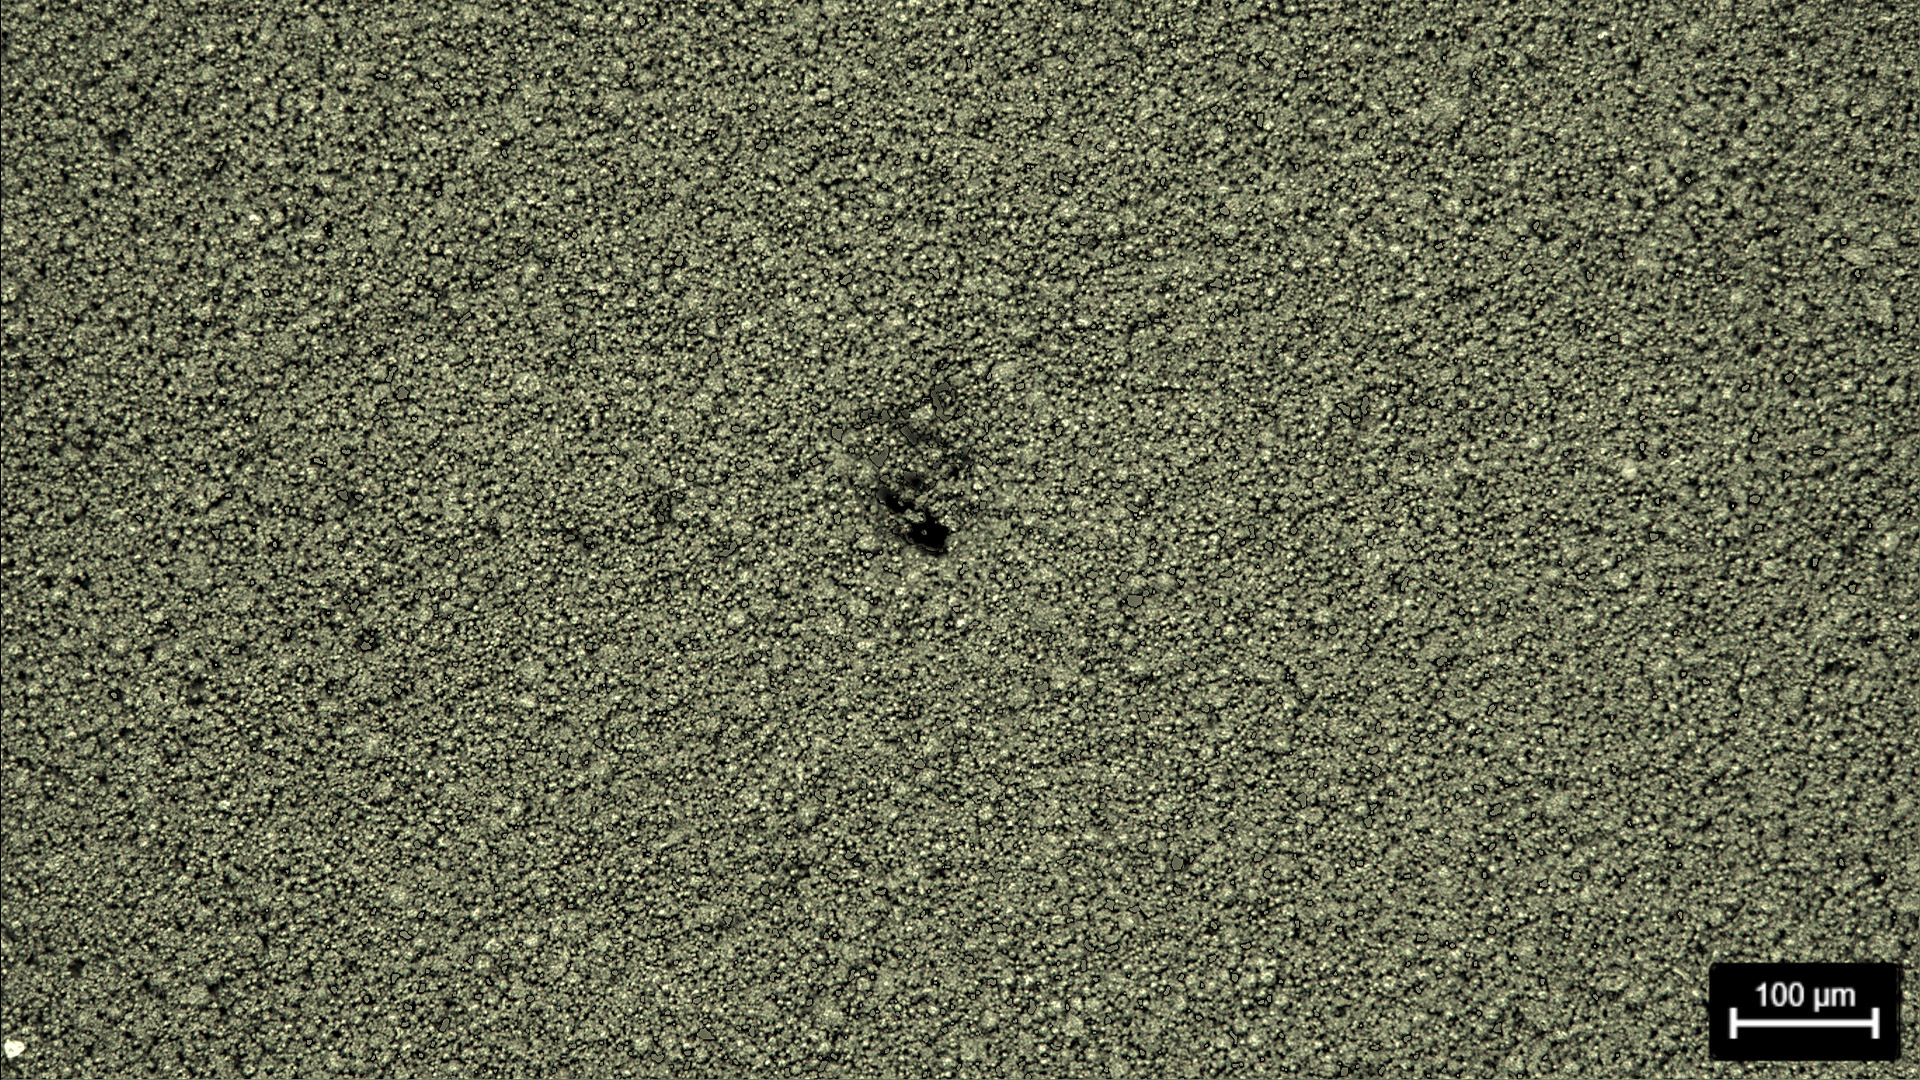 Battery electrode showing a hole defect. Image acquired with darkfield illumination and a Leica compound microscope.